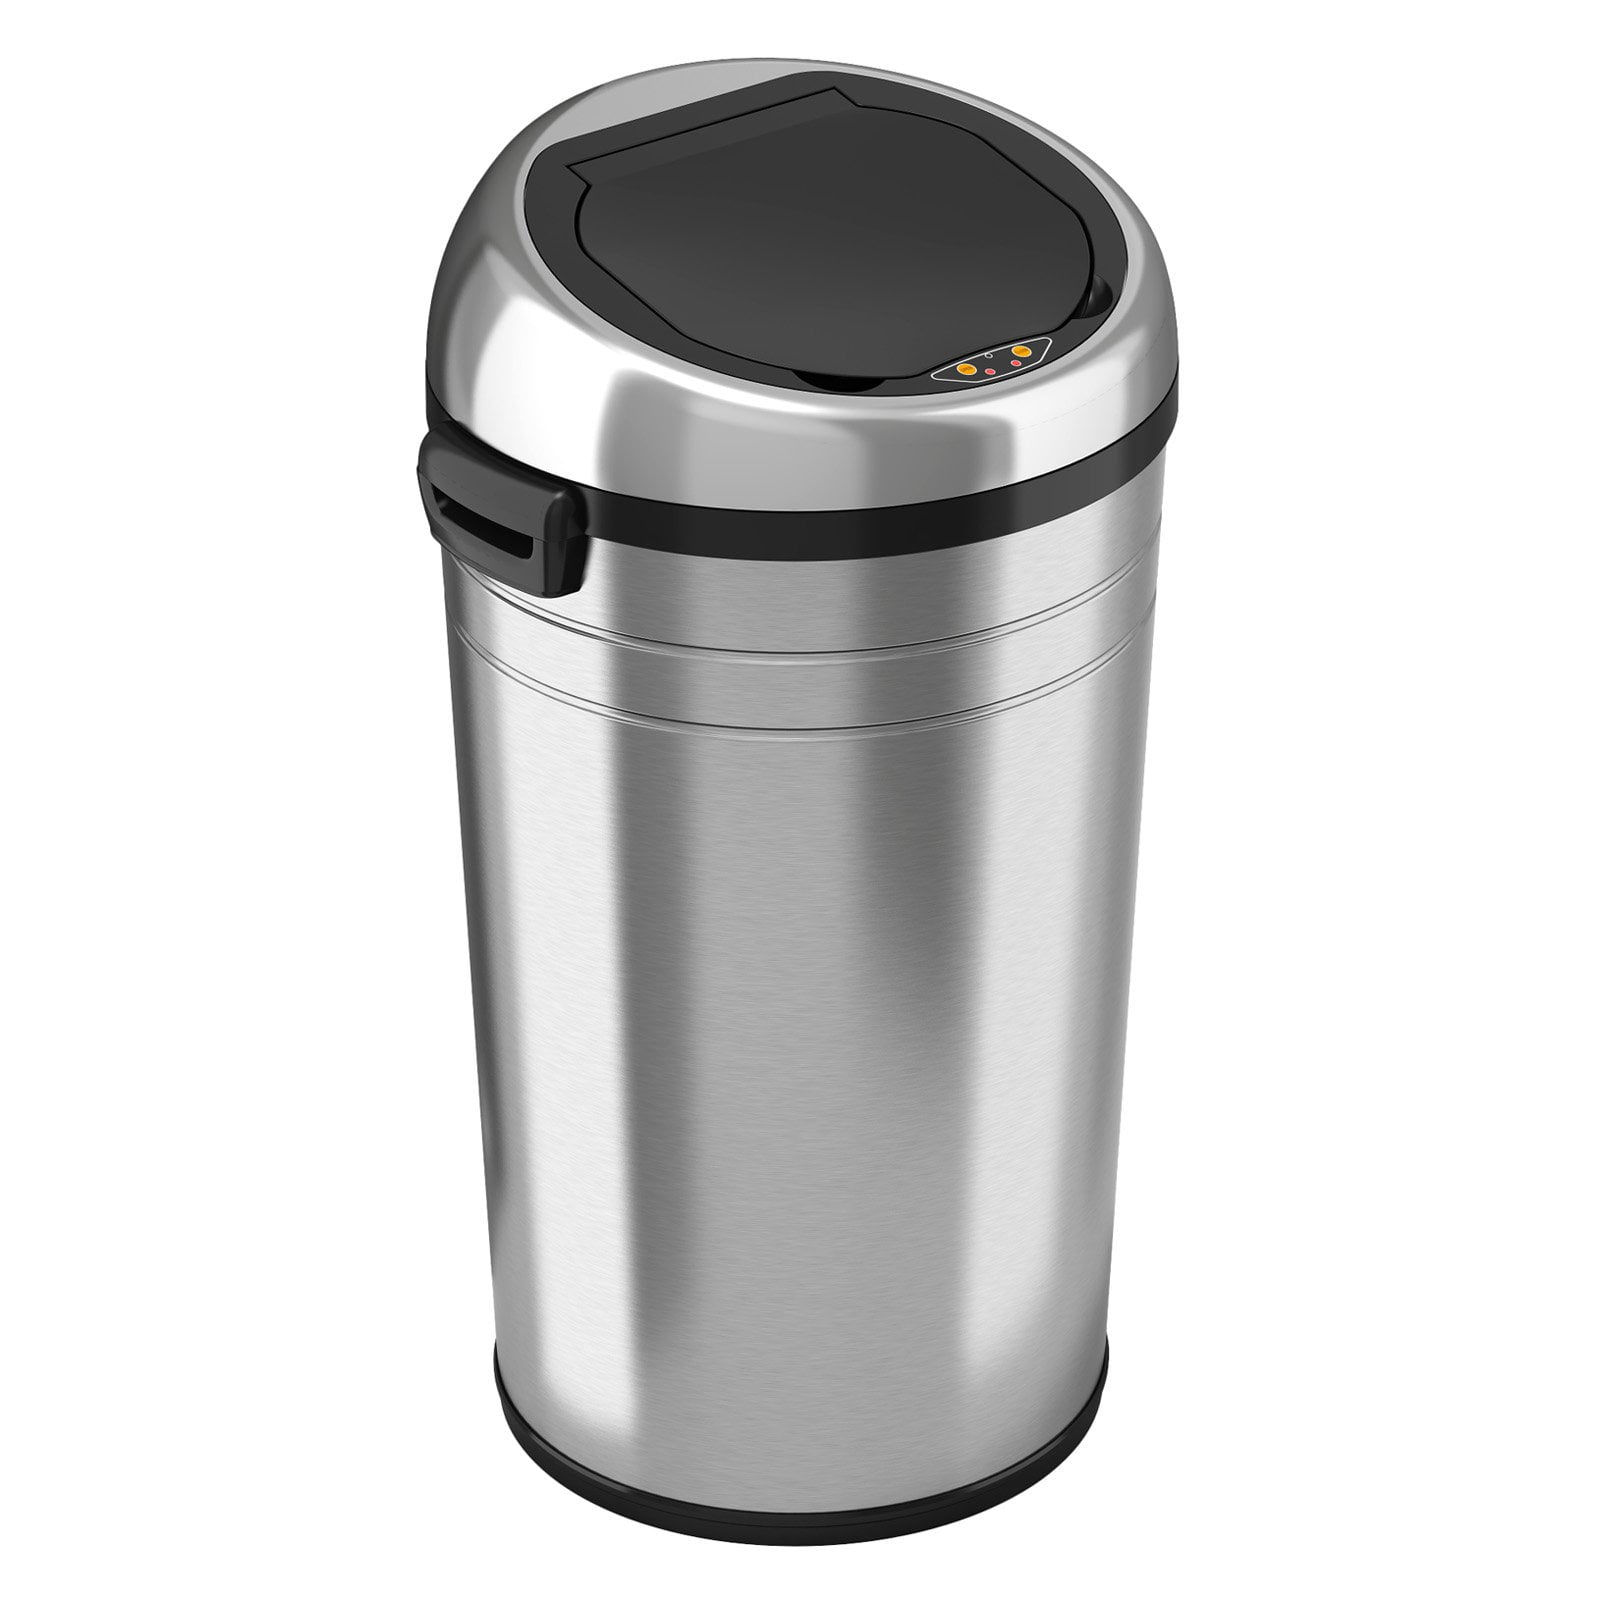 iTouchless 23 Gallon Stainless Steel Sensor Trash Can with Odor Filter Itouchless Stainless Steel Trash Can